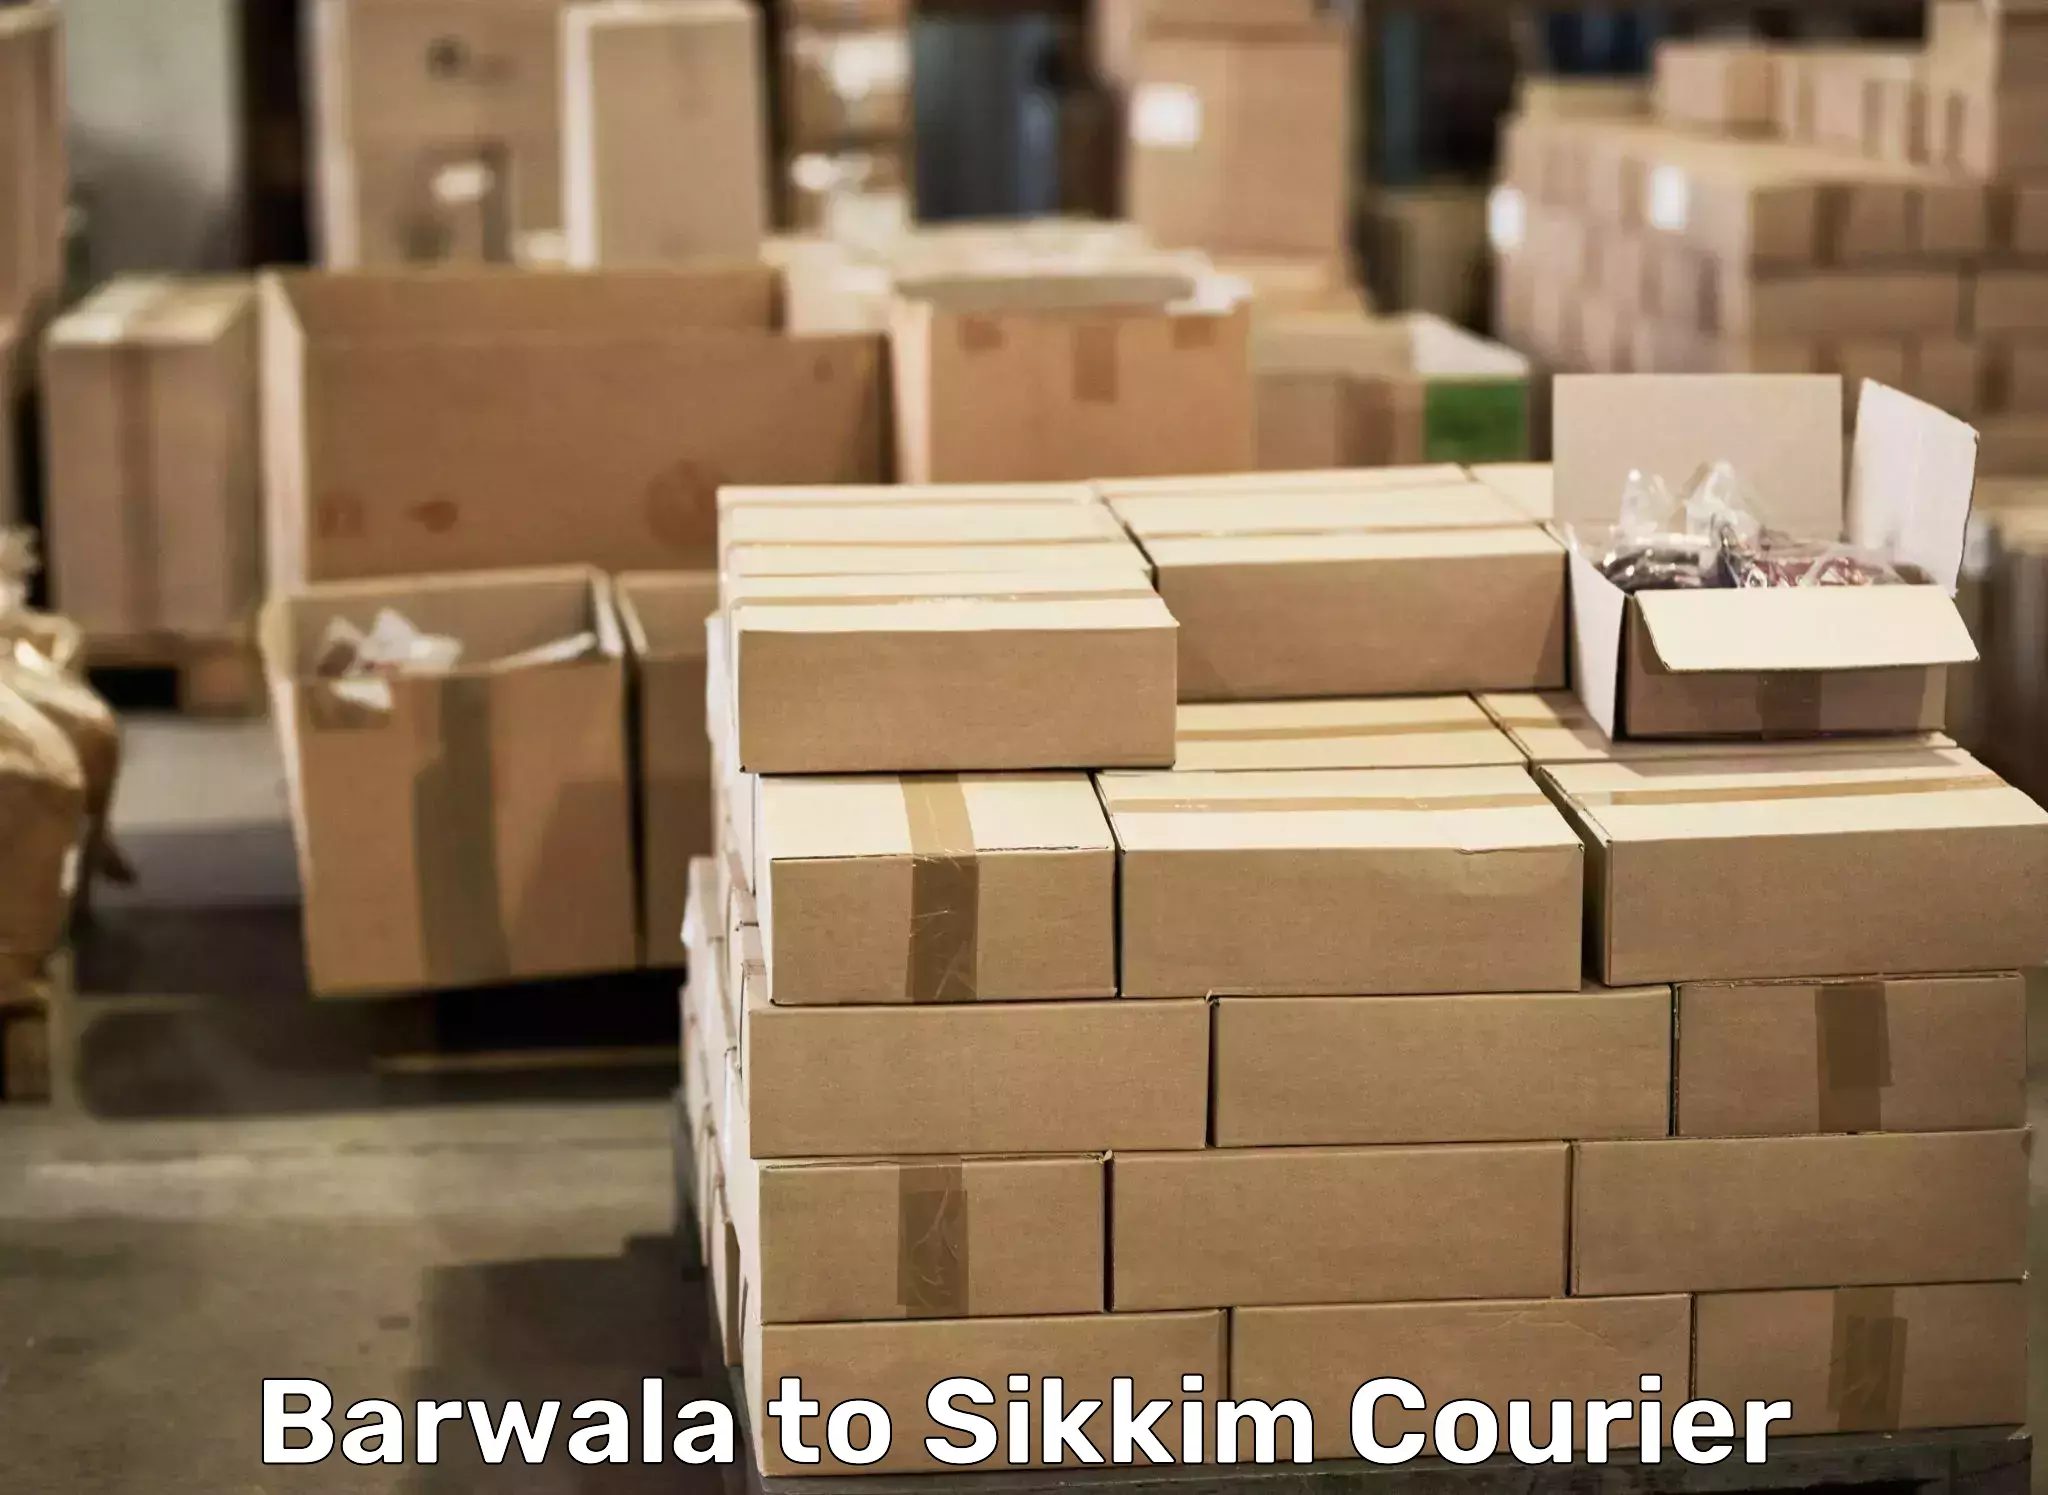 Full-service relocation in Barwala to Sikkim